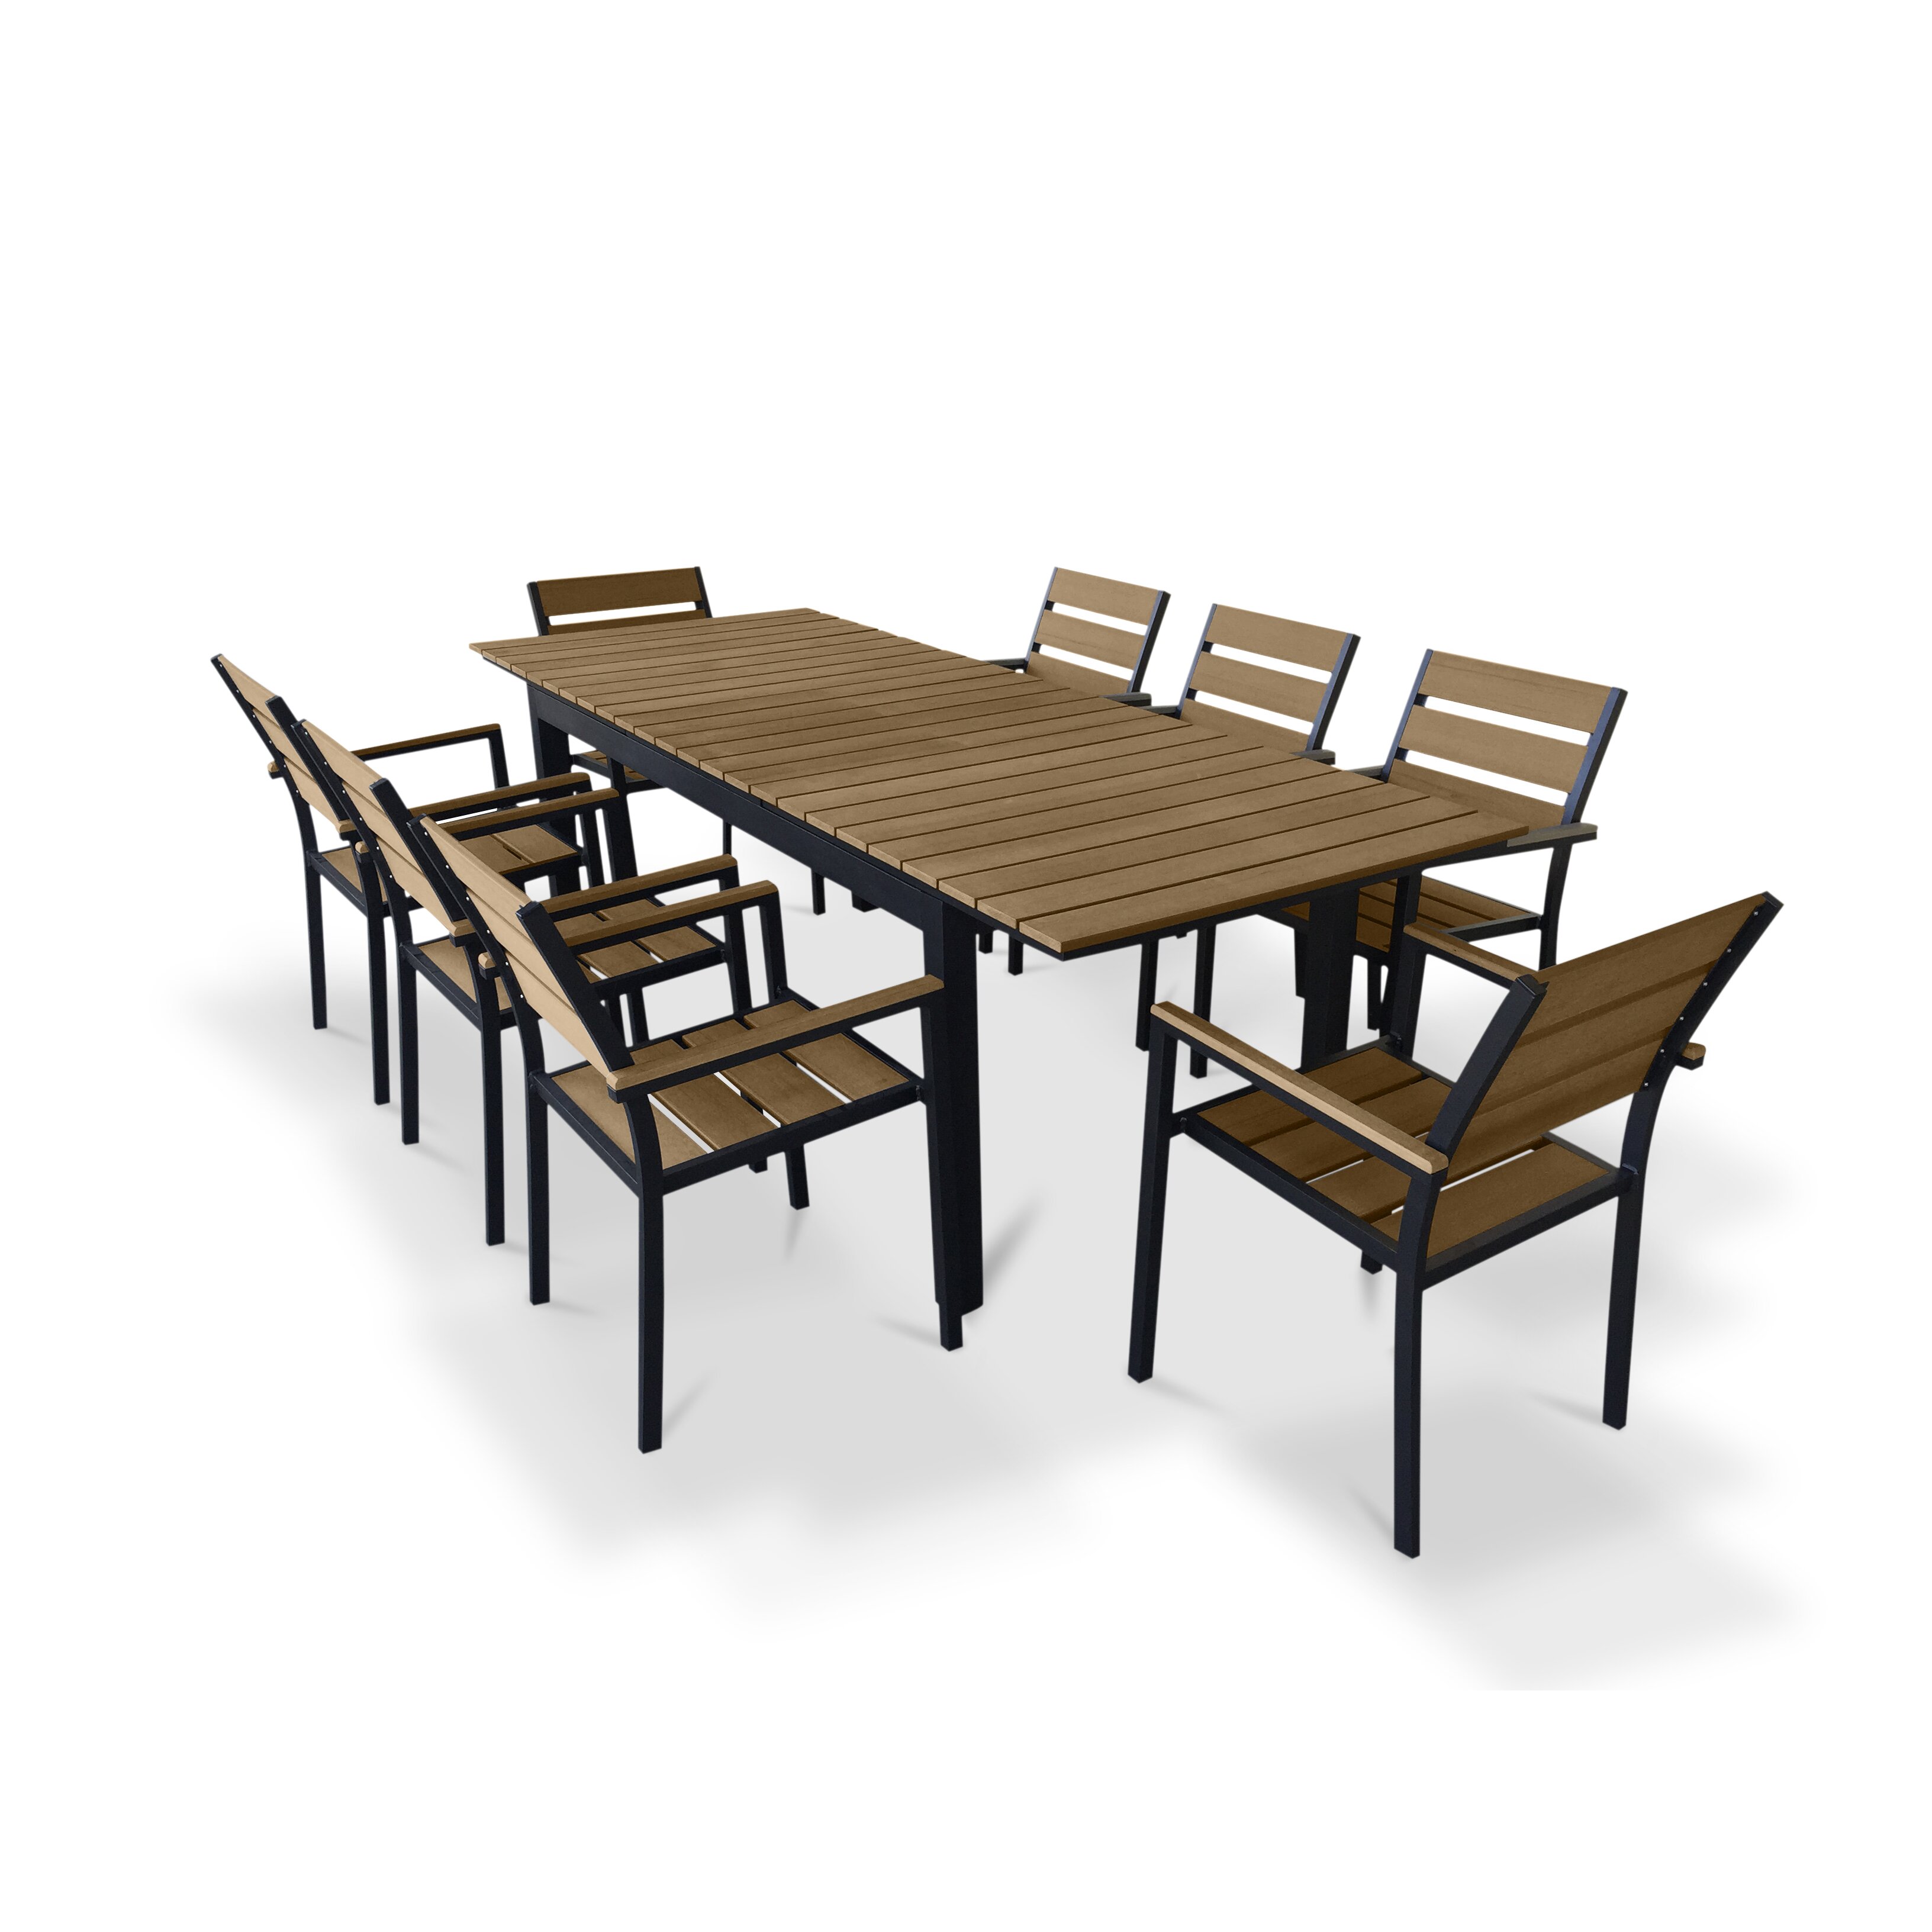 Urban Furnishings 9 Piece Extendable Outdoor Dining Set ...